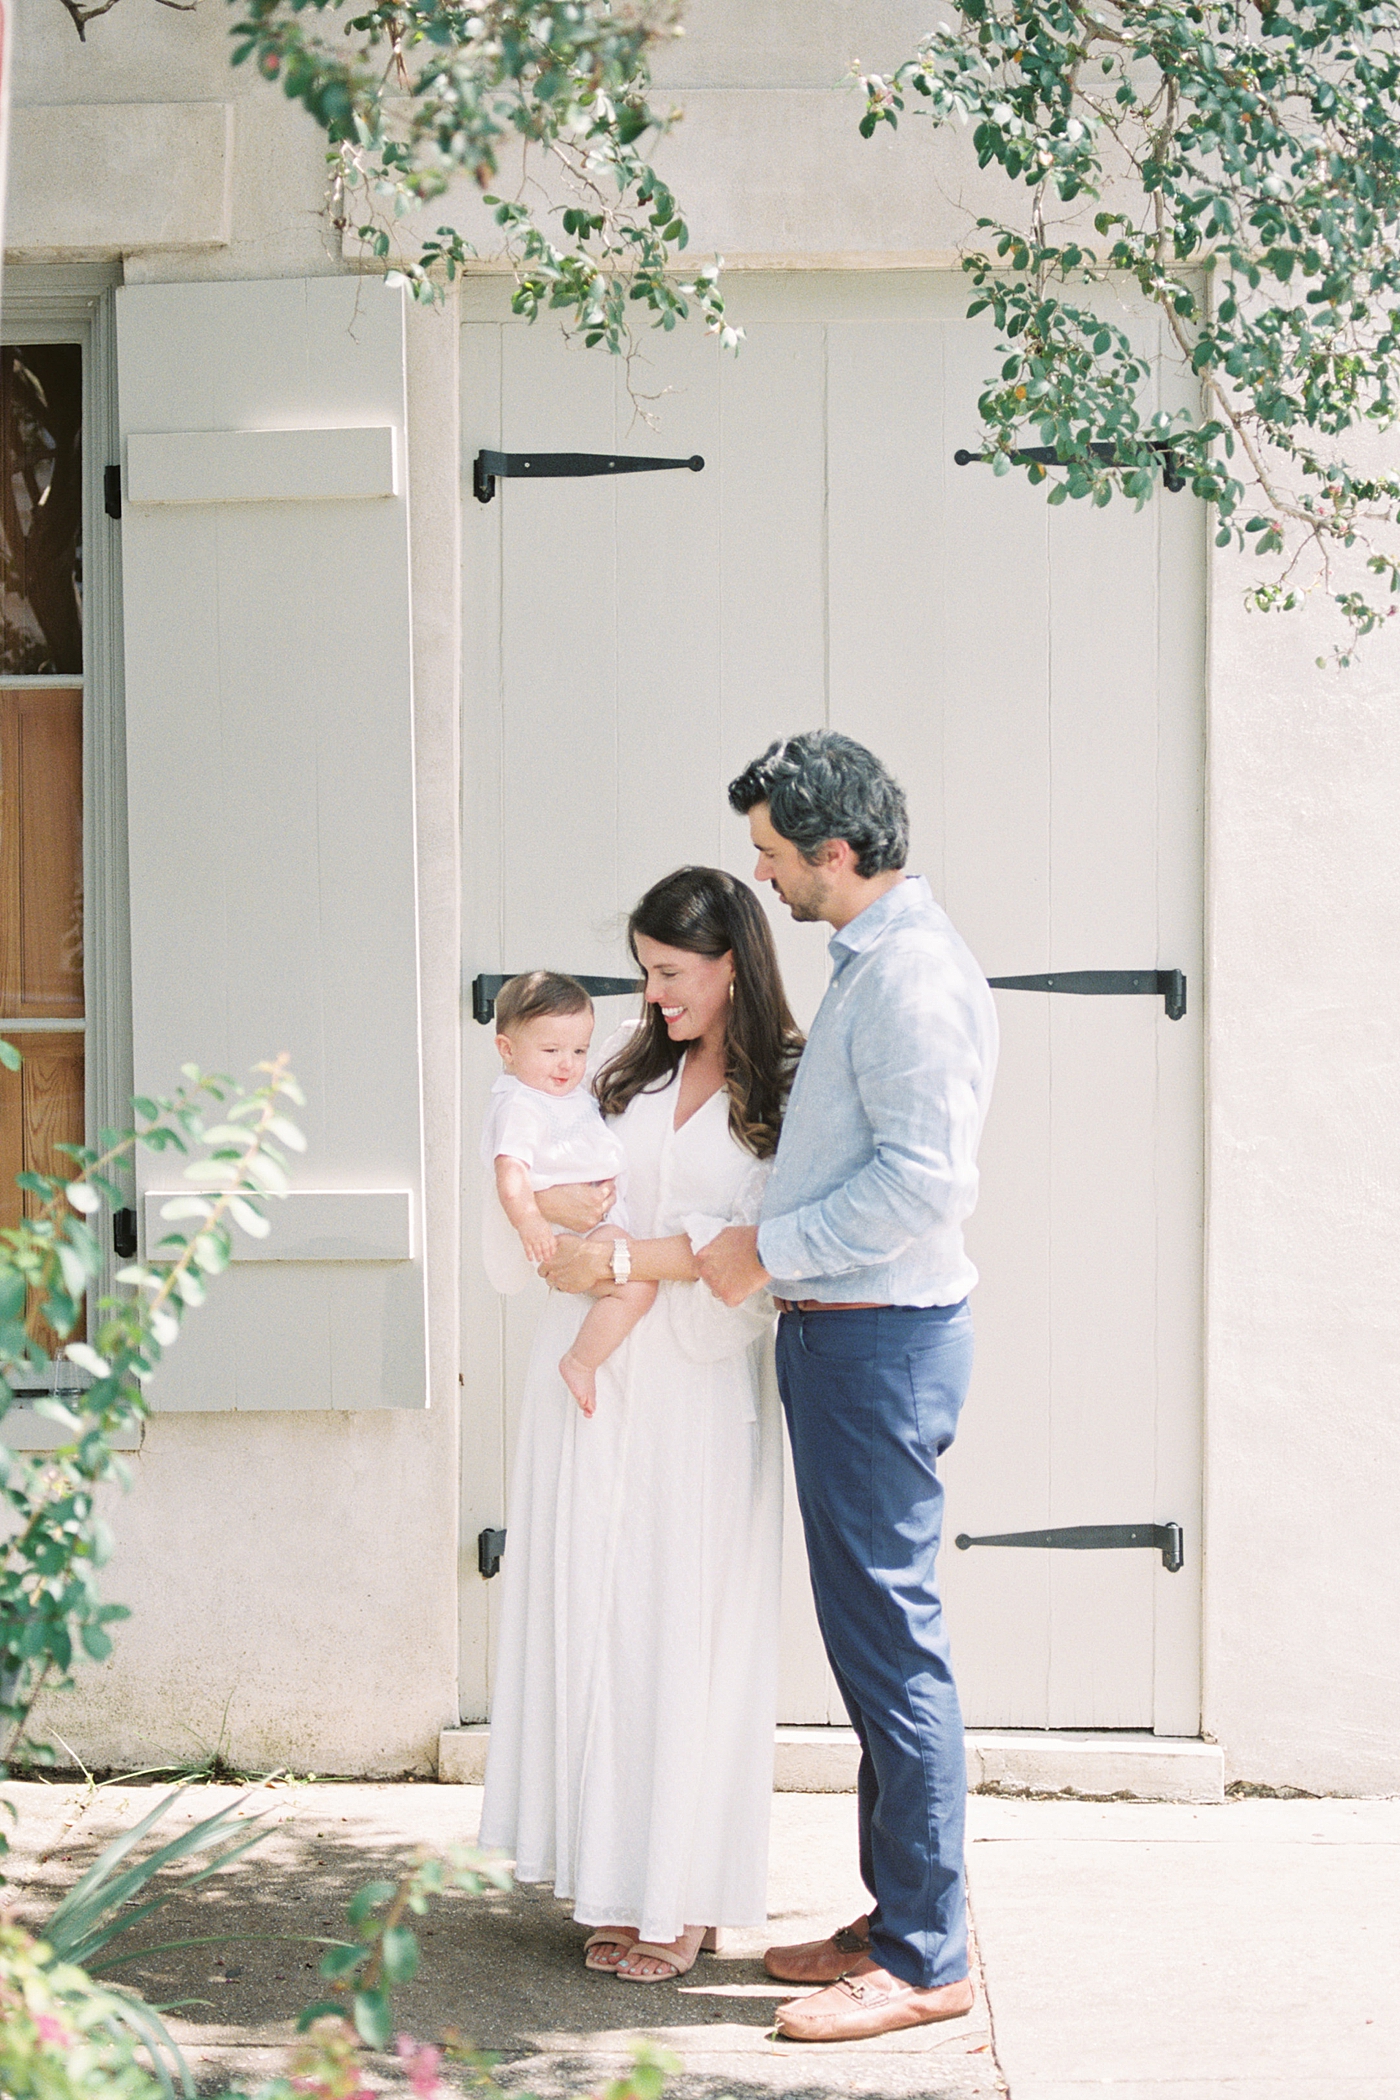 Husband and wife holding, smiling and looking at baby | Images by Caitlyn Motycka